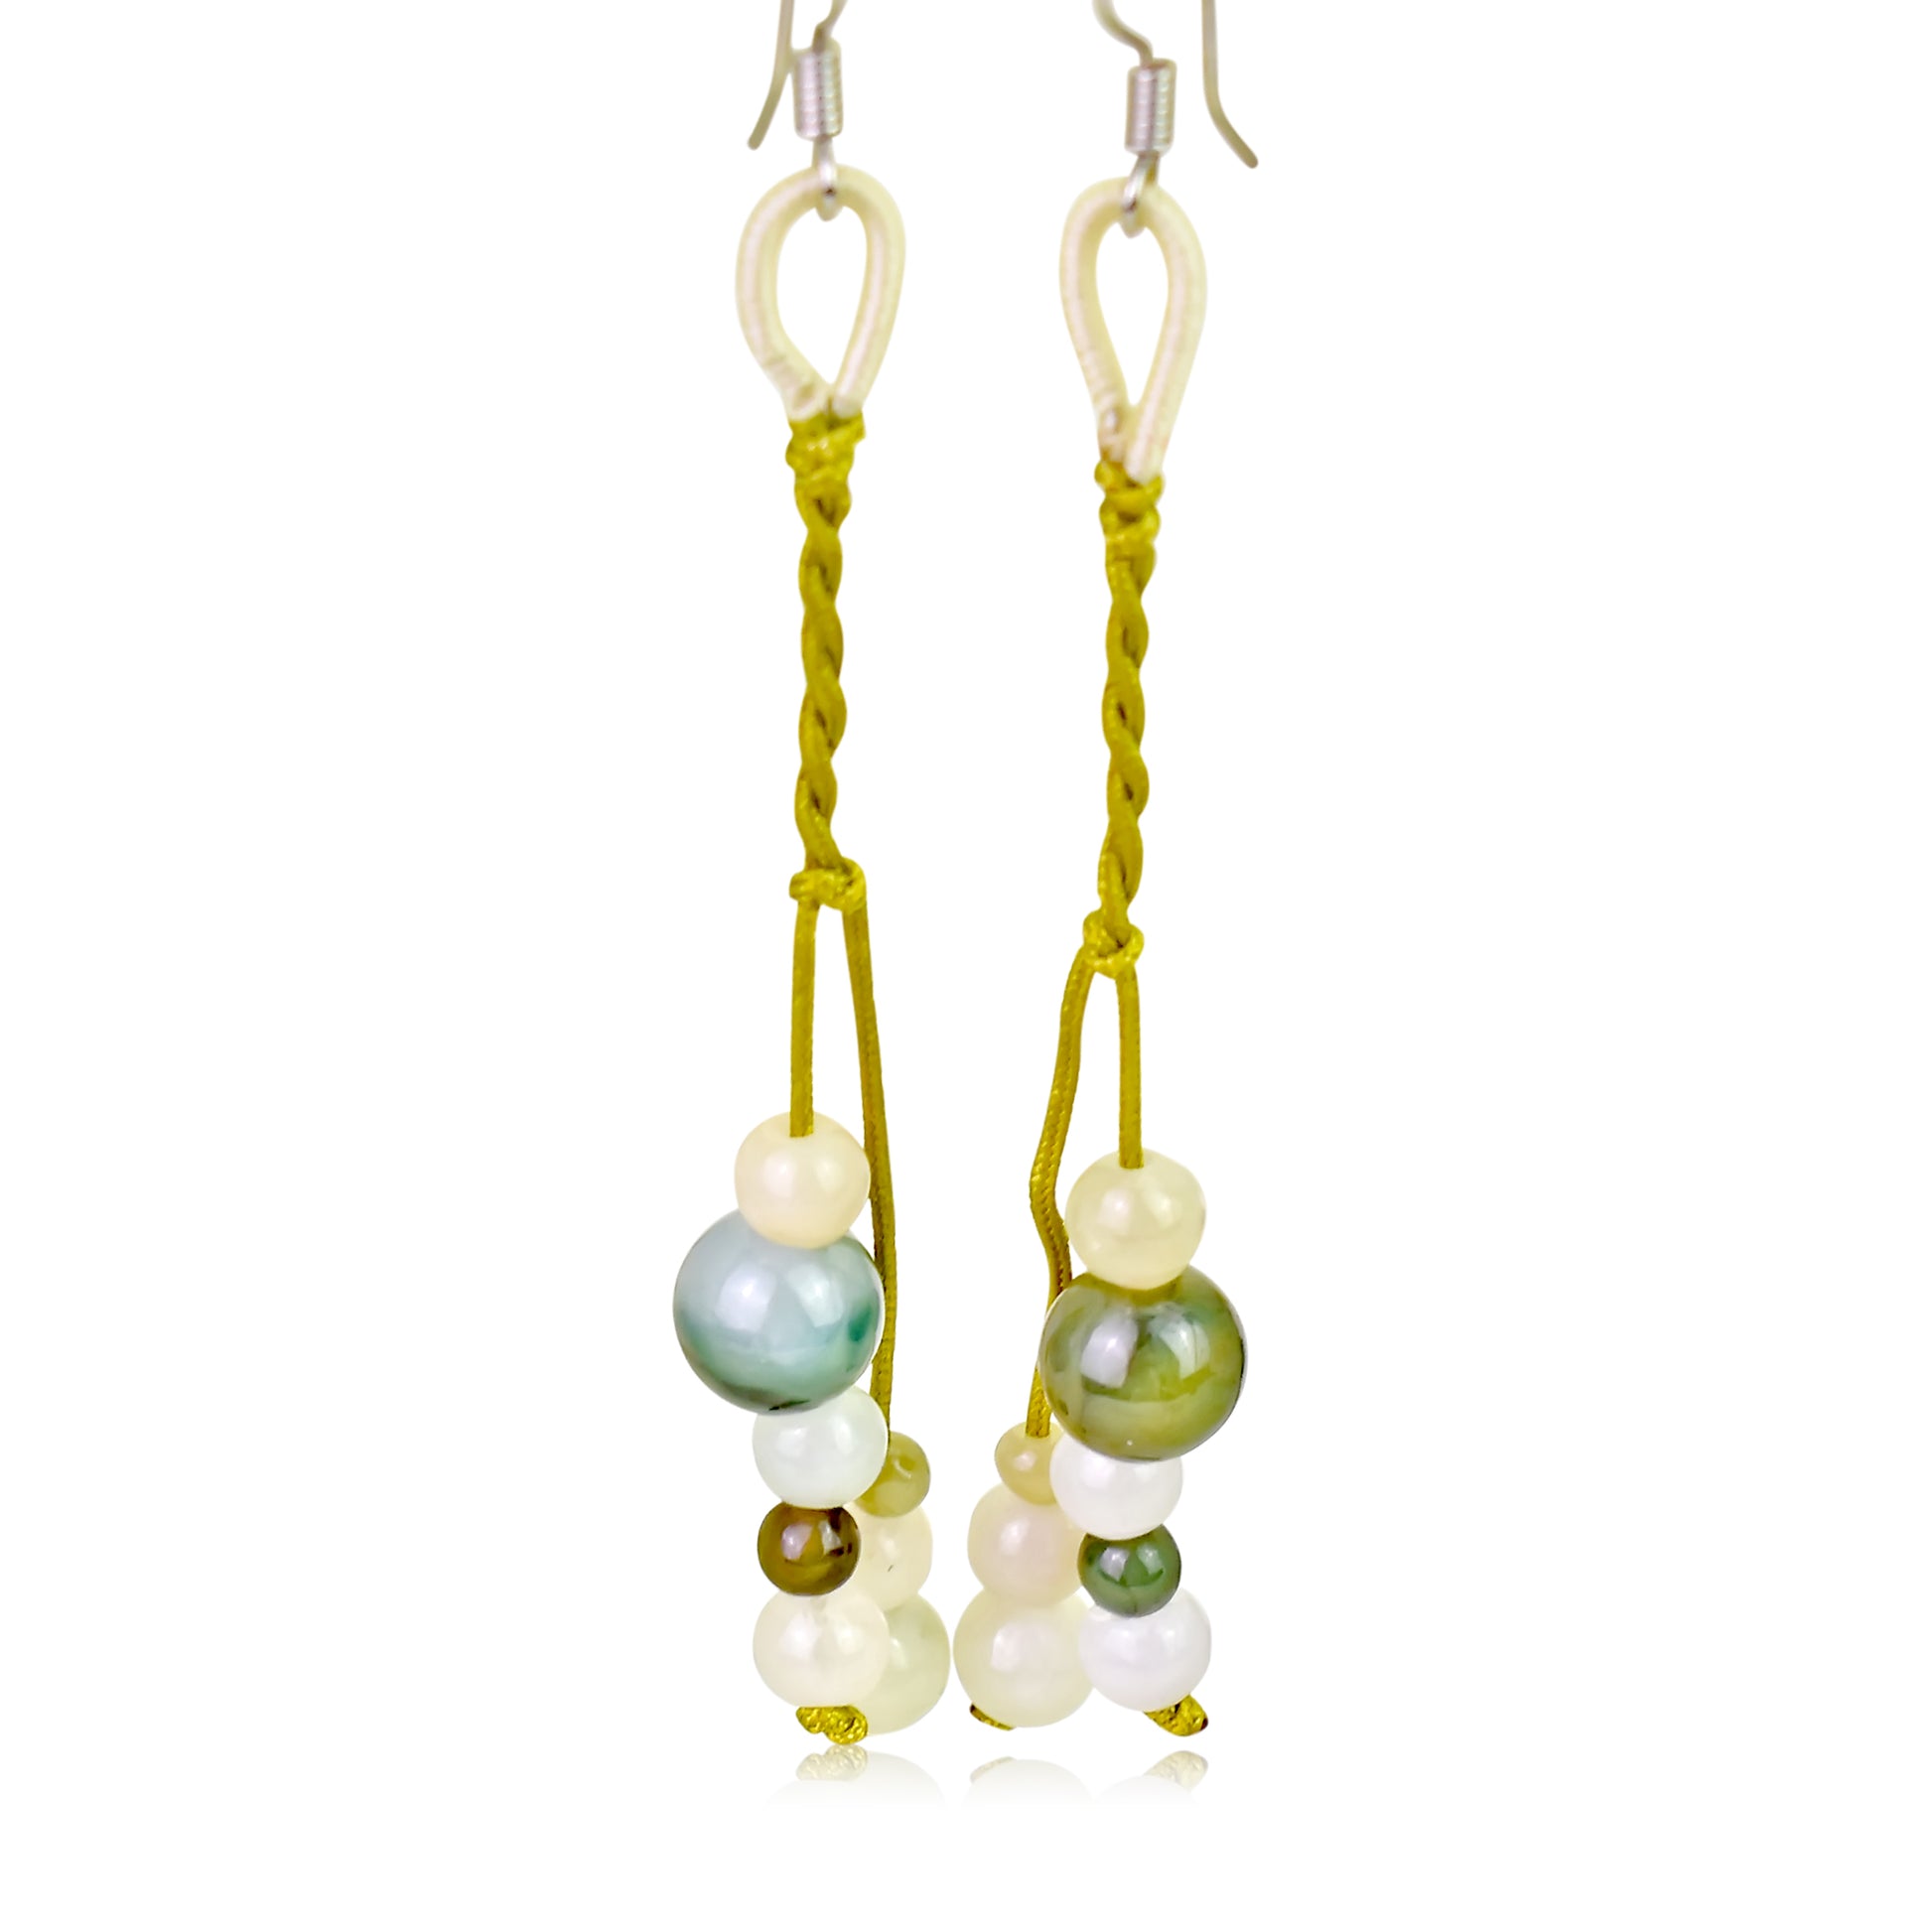 Add a Touch of Elegance to Your Look with Handmade Jade Beads Earrings made with Yellow Cord